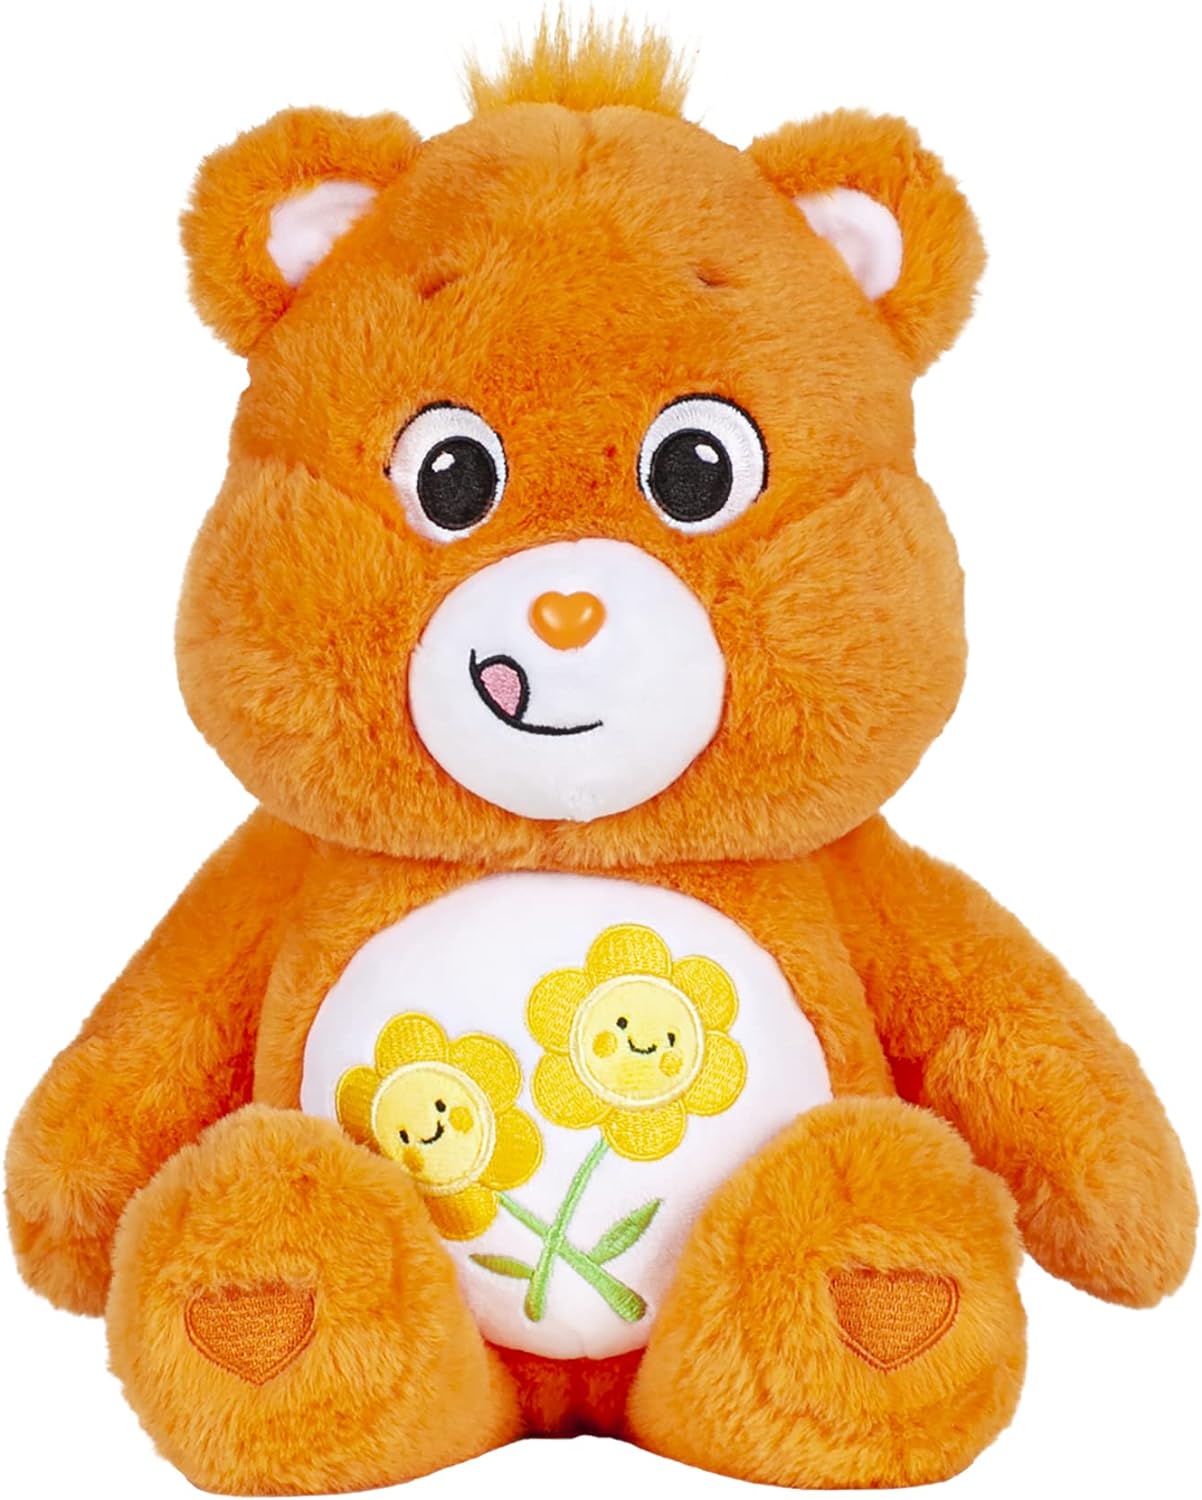 14" Care Bears Plush: Dare to Care Bear $8.99, More + Free Shipping w/ Prime or on $35+